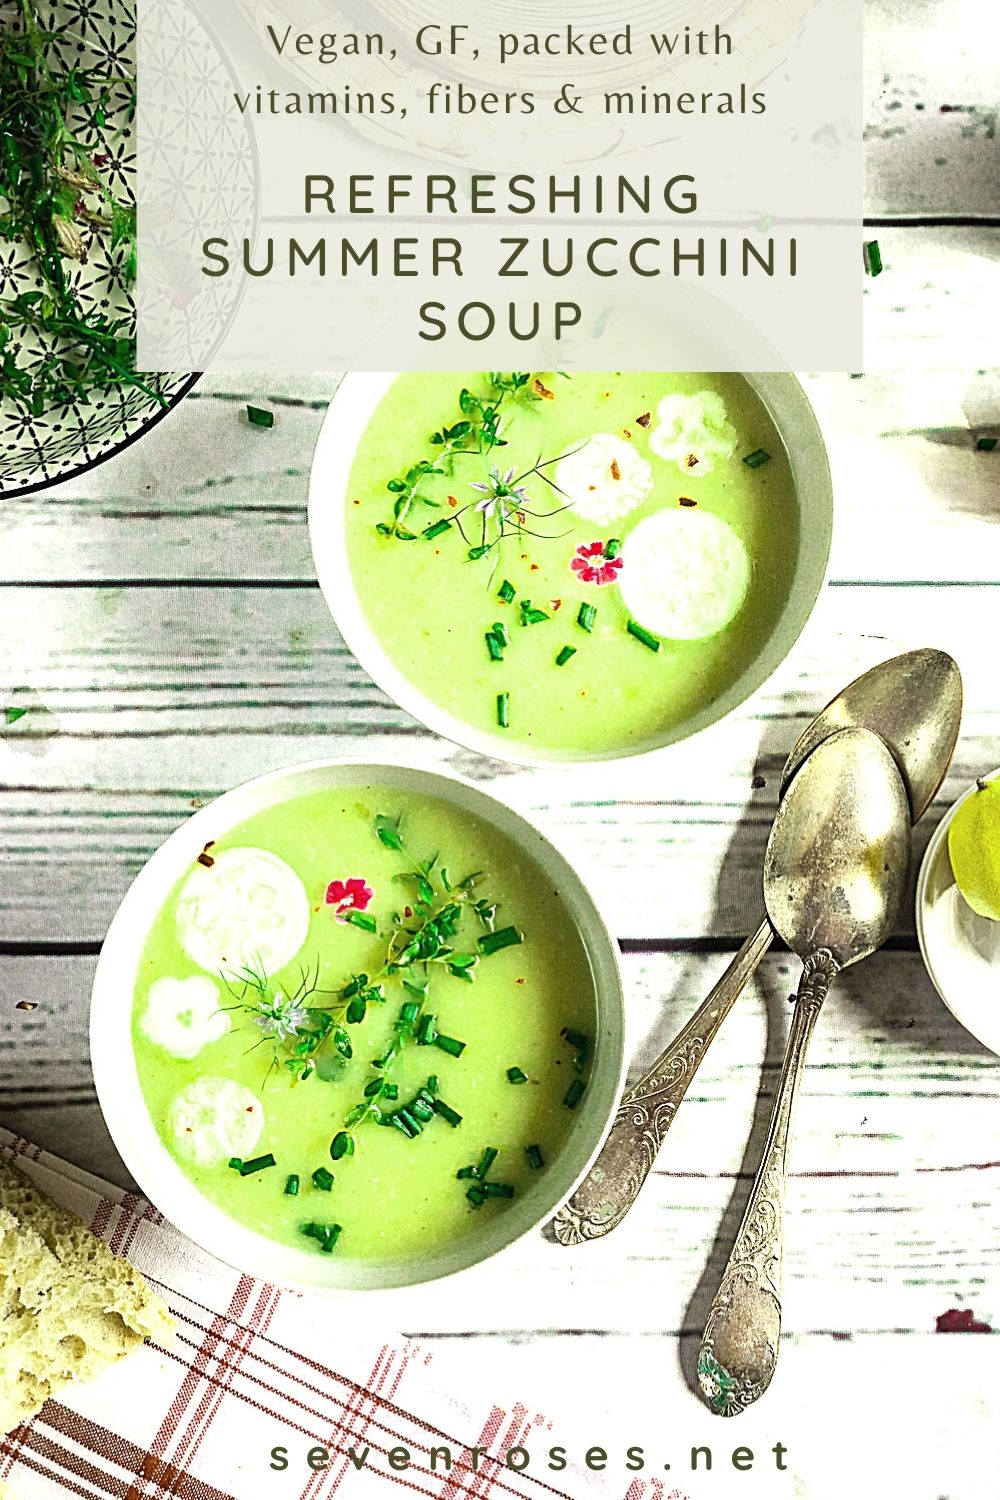 It's so hot! This refreshing summer zucchini soup is all you'll want to eat.